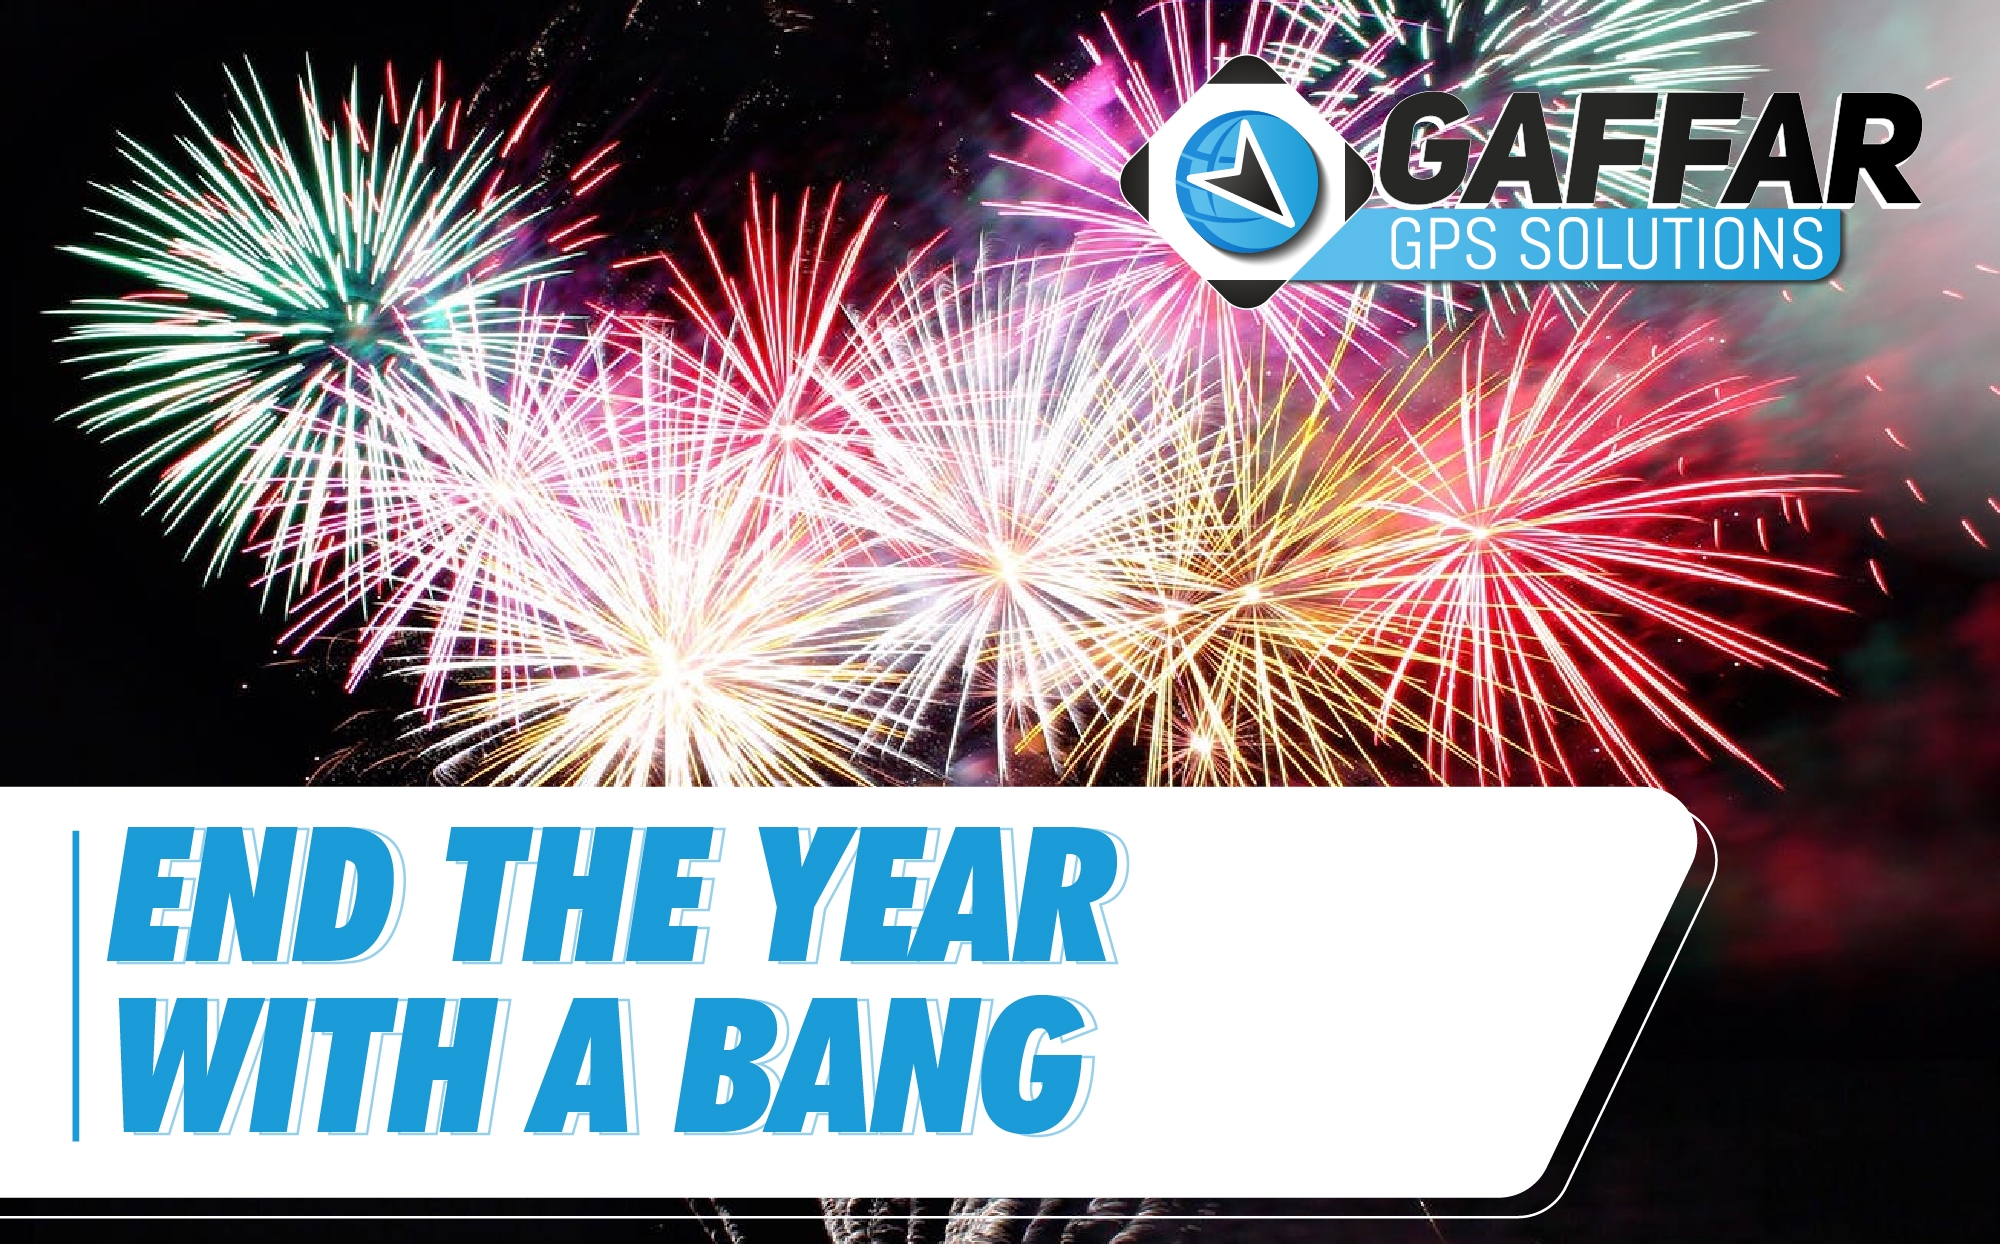 END THE YEAR WITH A BANG!